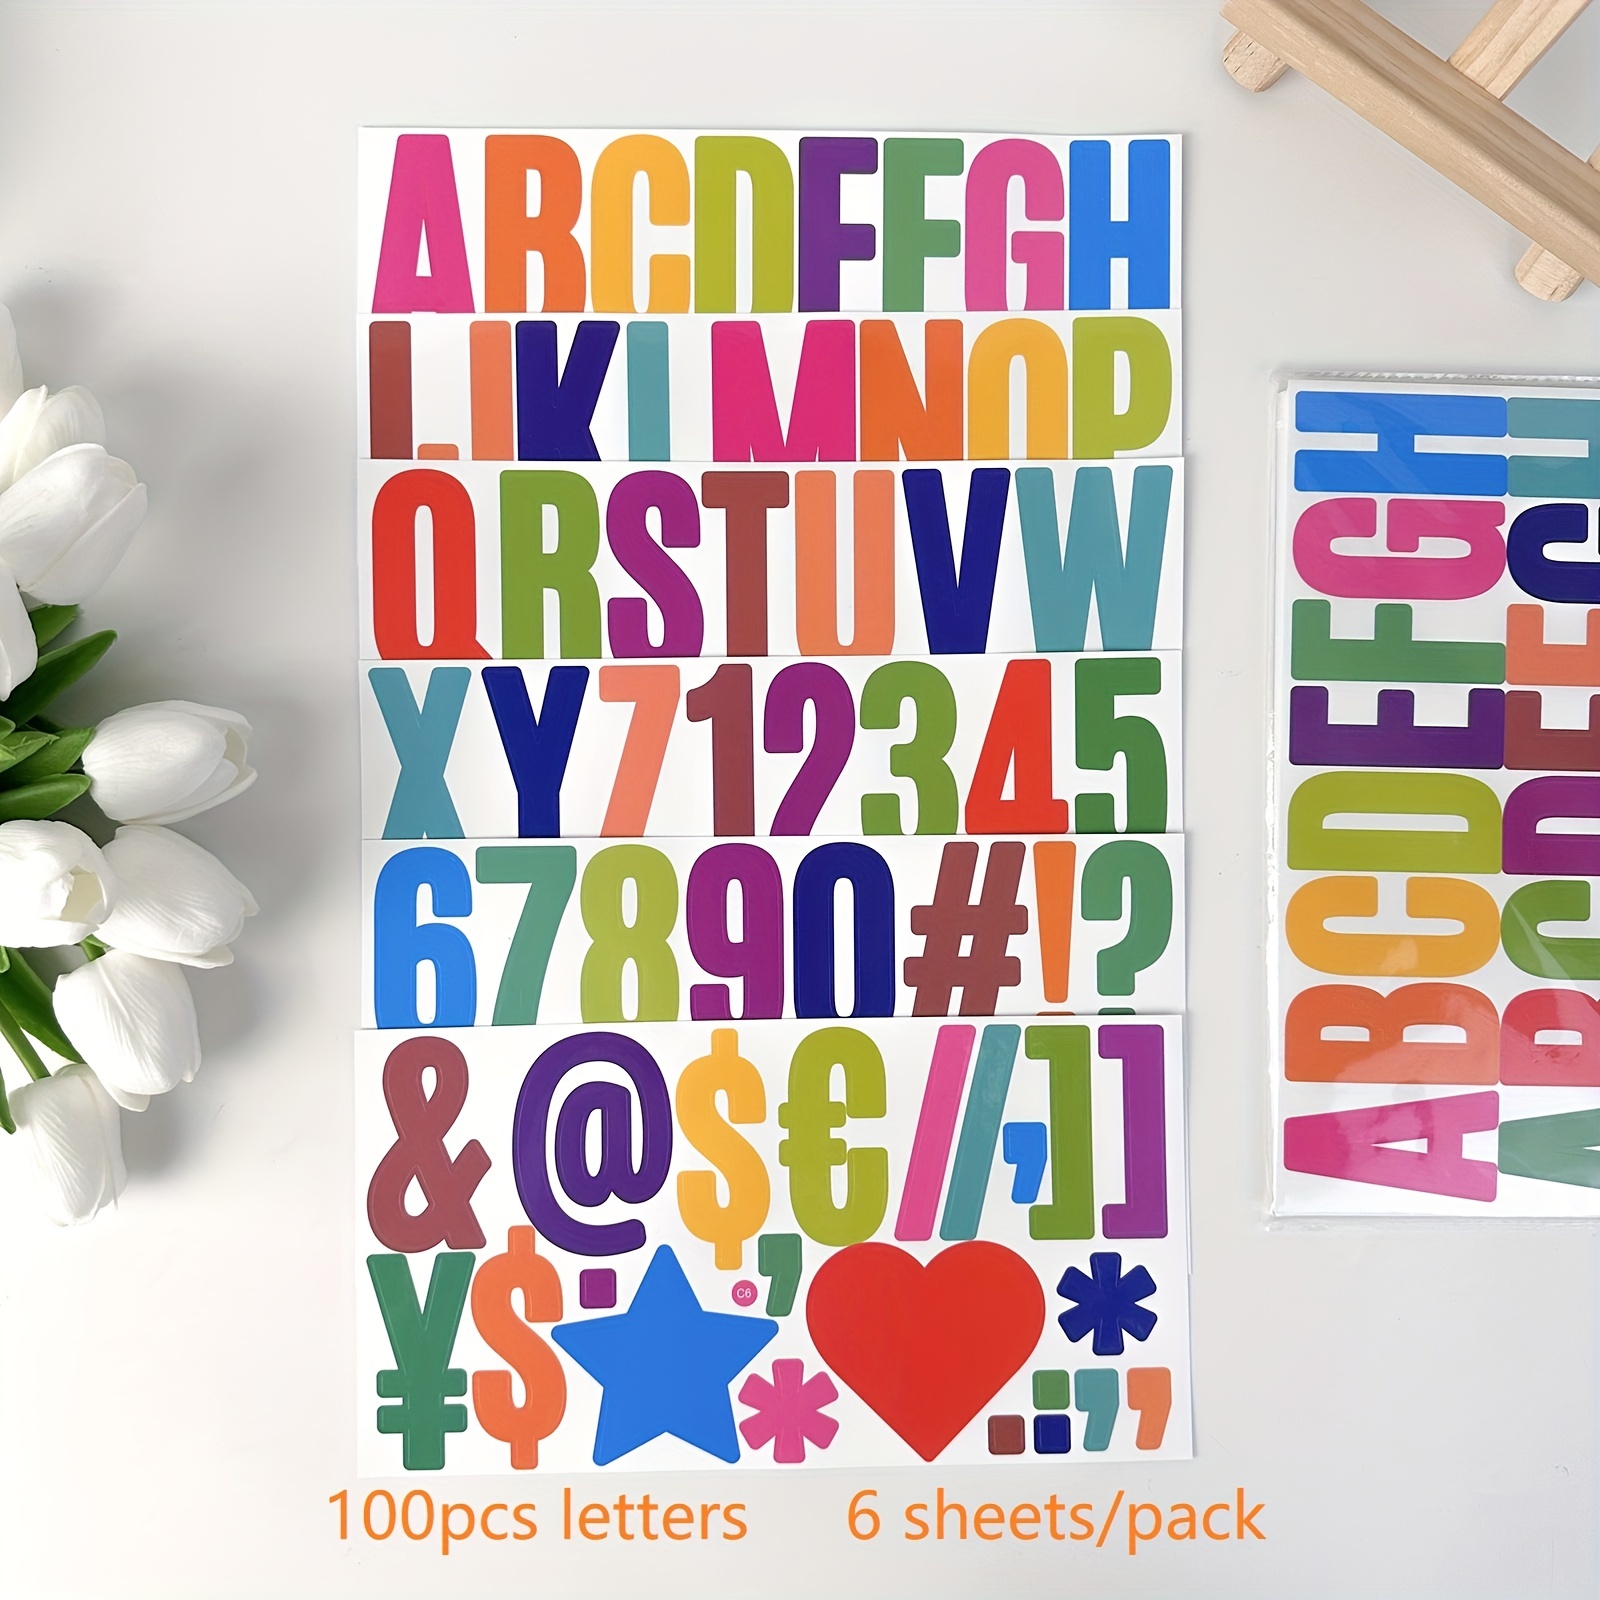 Pnellth 24 Sheets Alphabet Stickers Self-adhesive Great Stickiness  Decorative Large Letter Stickers 2.5 Inch Bulletin Board Classroom Mailbox  Window Door Home Decor Decals 